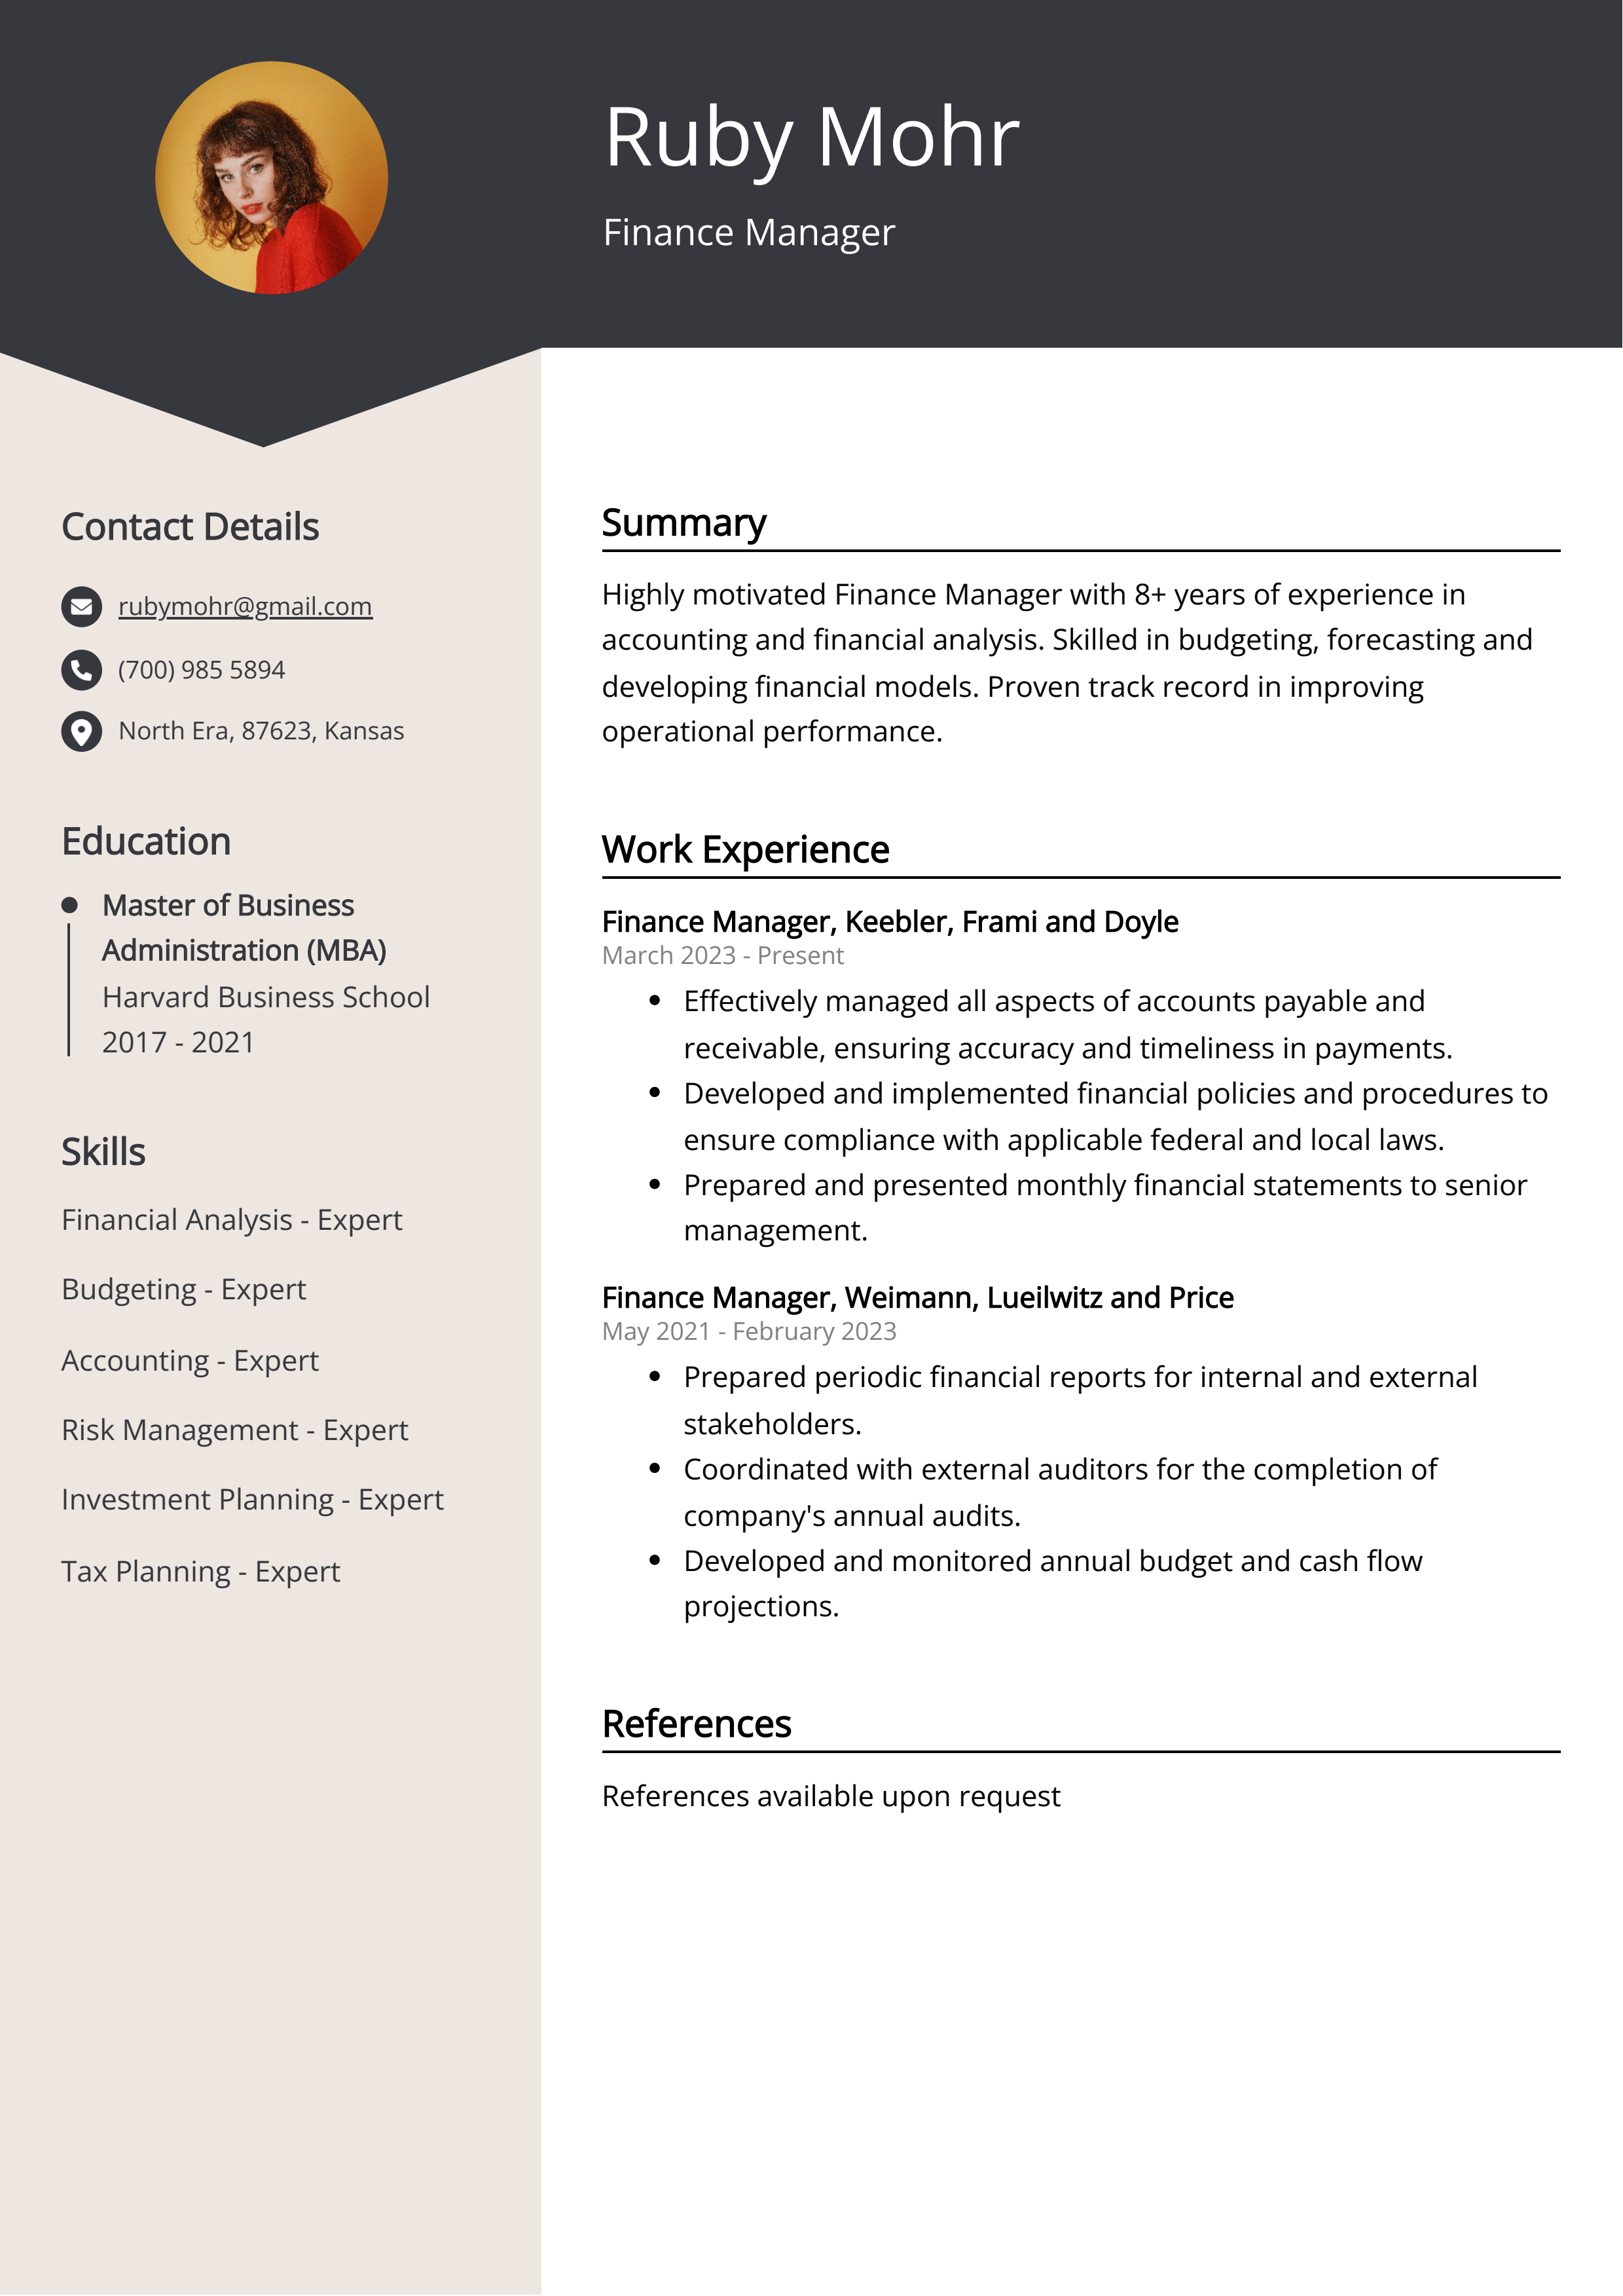 Finance Manager CV Example